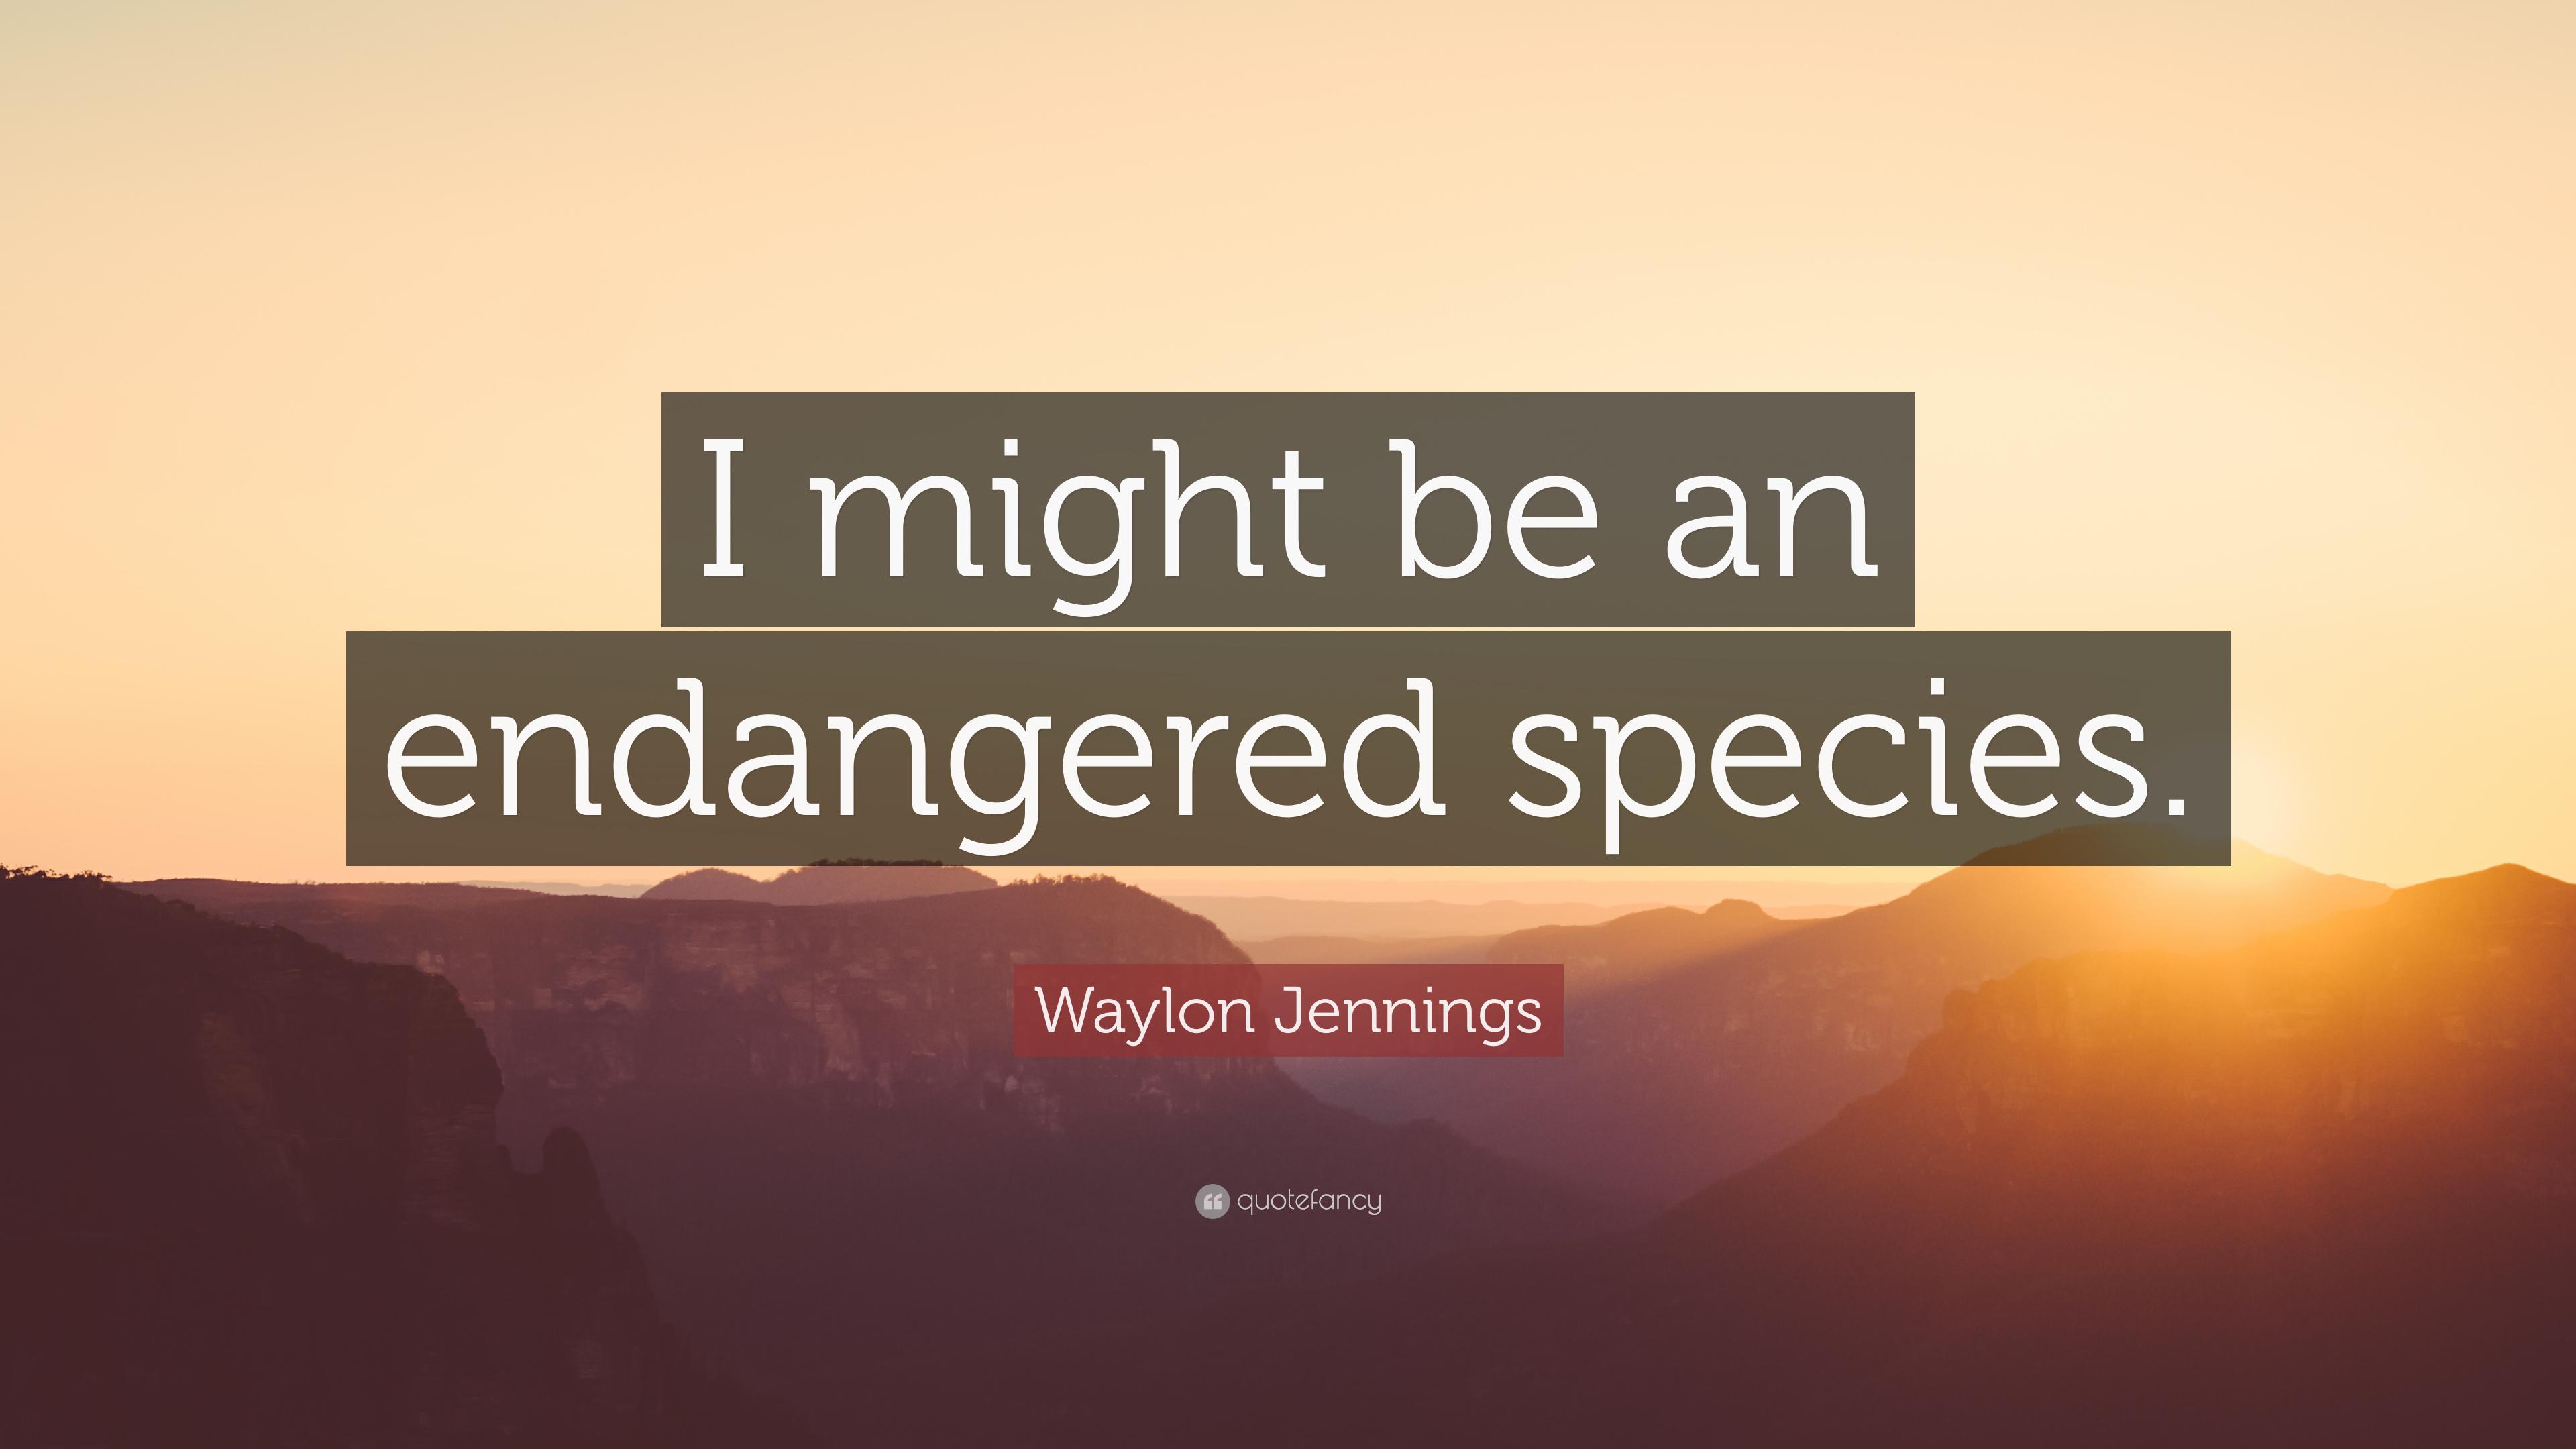 Waylon Jennings Quote: “I might be an endangered species.” 7